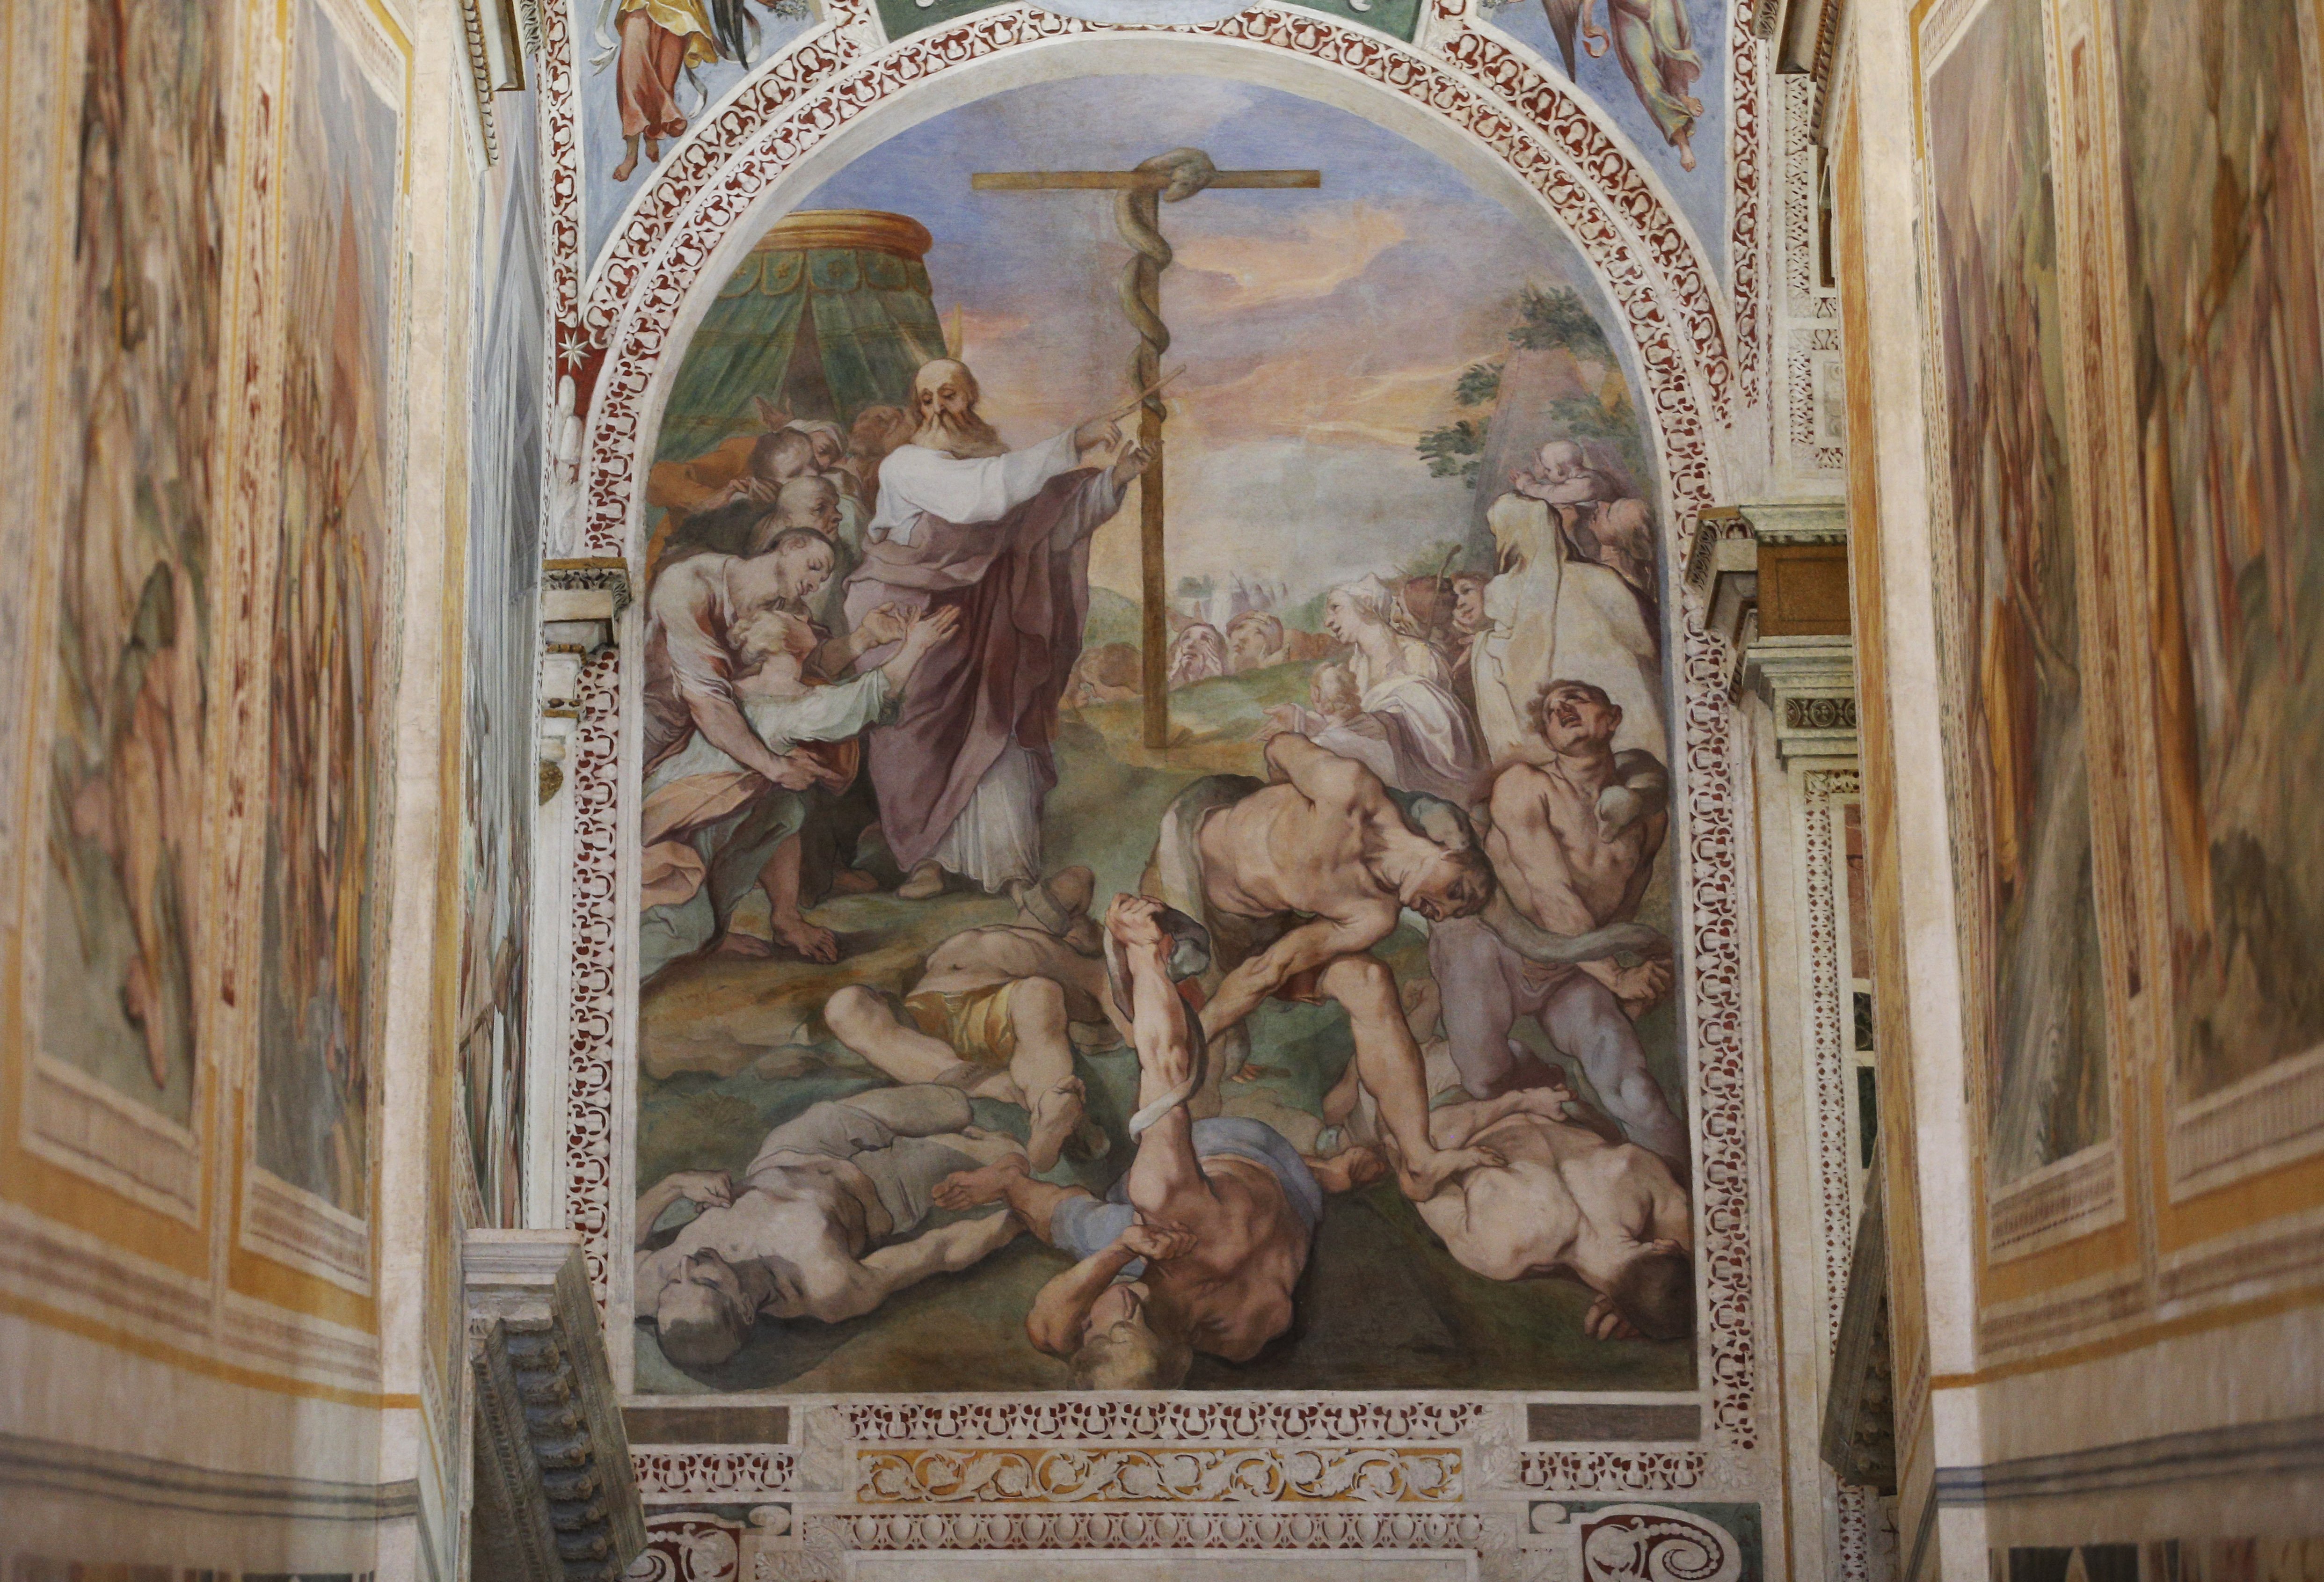 A recently restored fresco showing Moses and the copper snake is seen at the Pontifical Sanctuary of the Holy Stairs Oct. 8, 2020, in Rome. (CNS/Paul Haring)